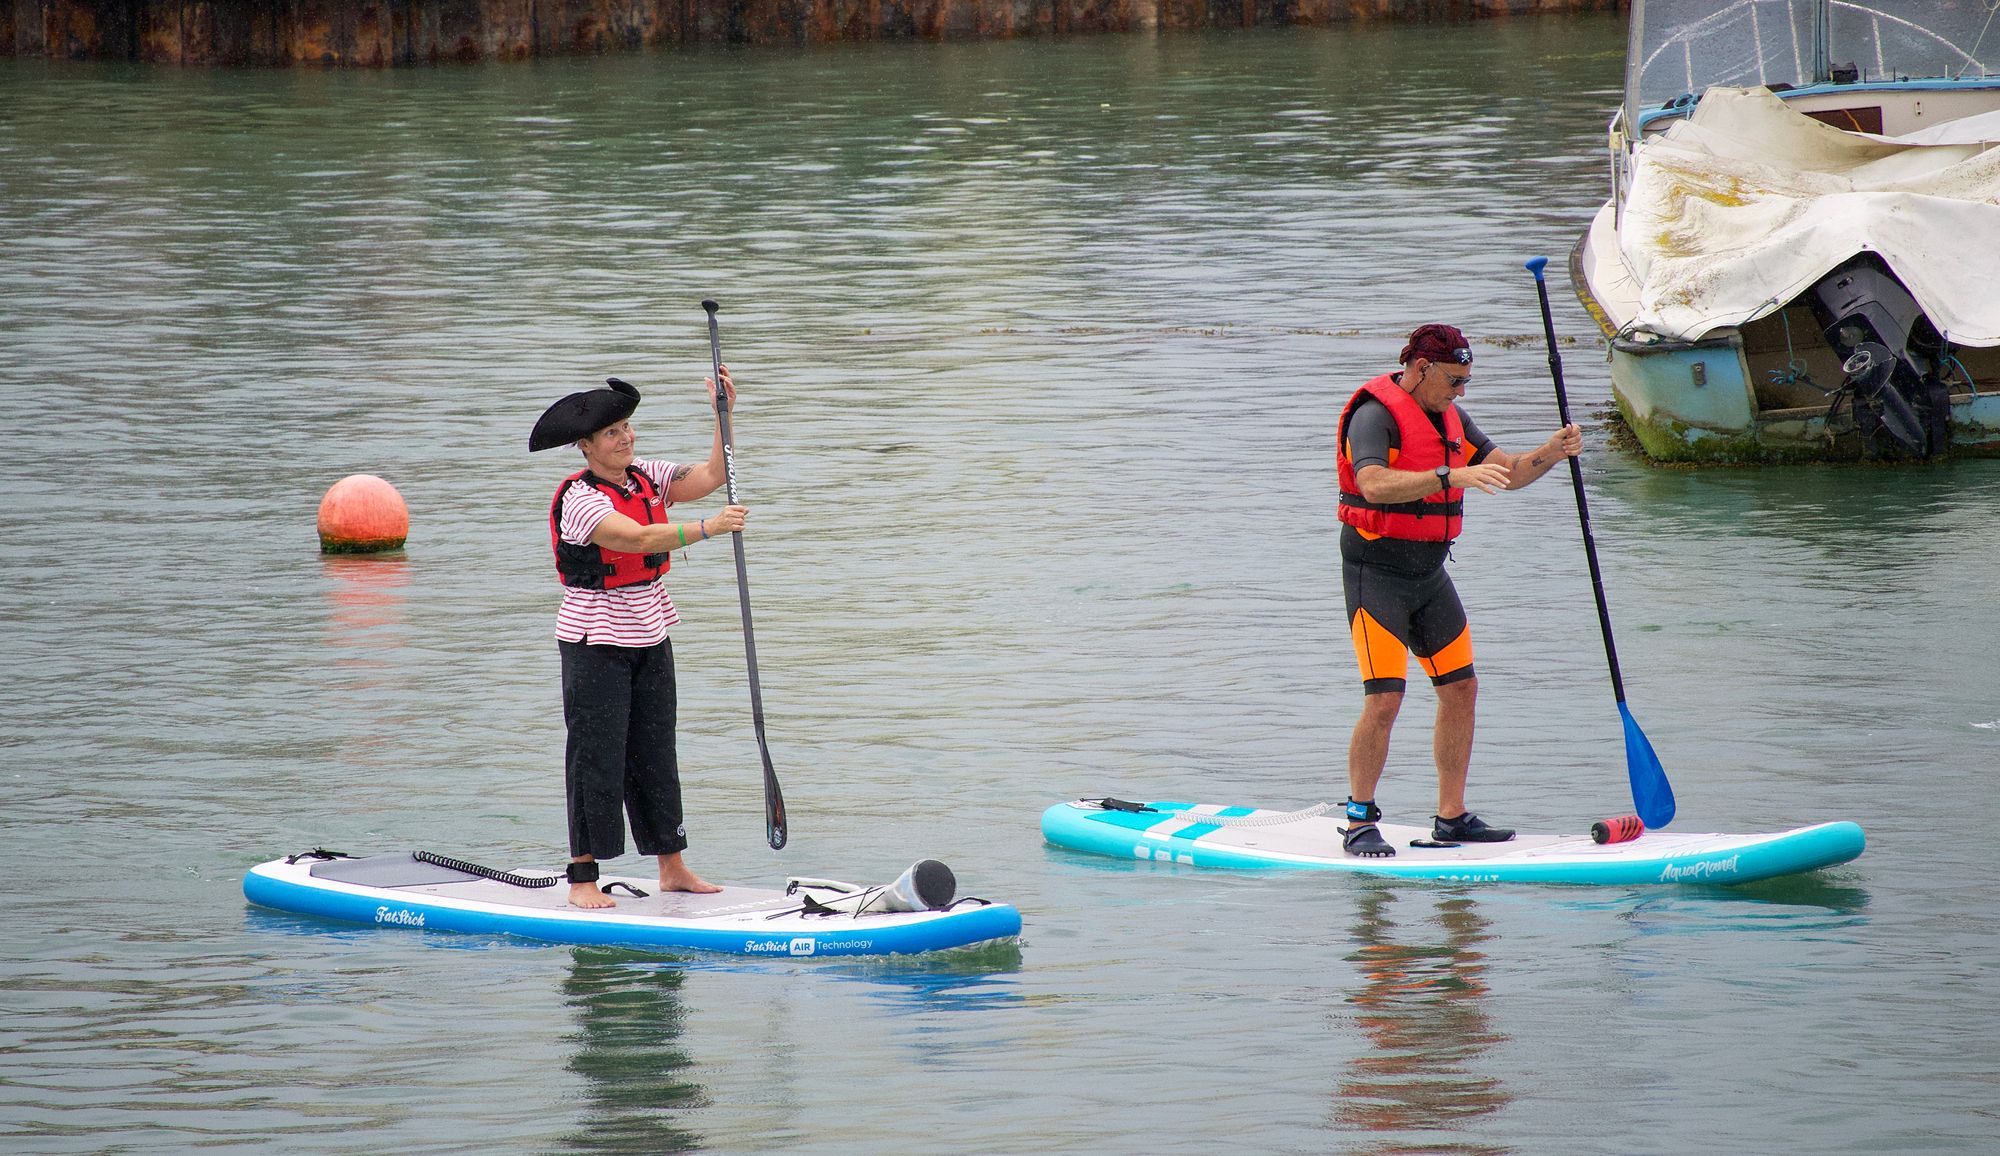 Gallery: Paddle-boarding Pirates